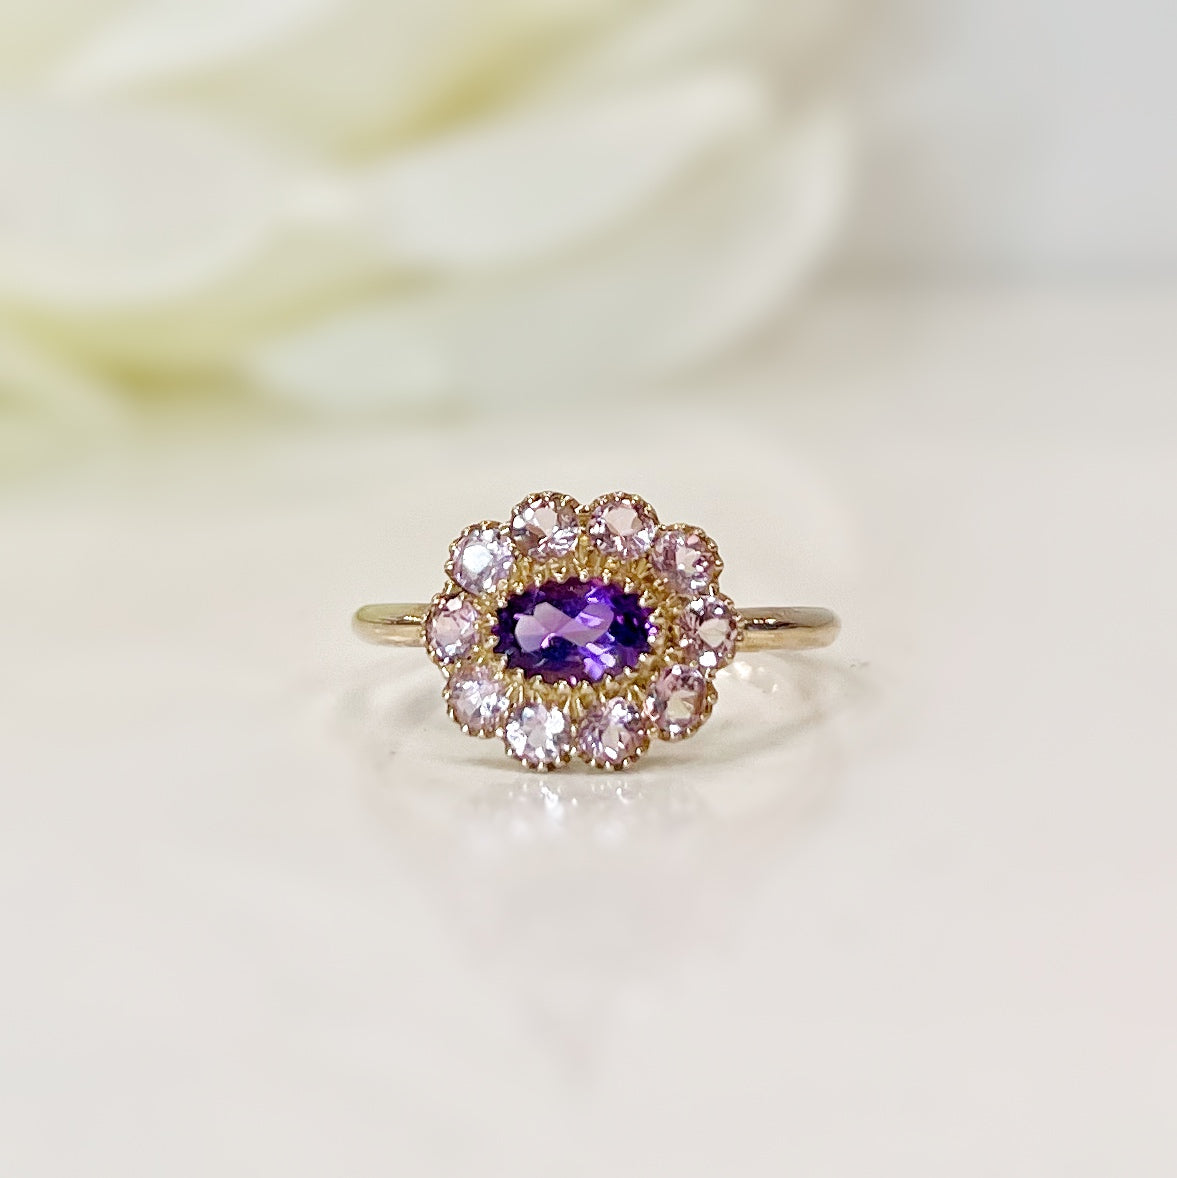 9ct Yellow Gold Amethyst and Diamond Floral Victorian Reproduction Ring - Size M 1/2